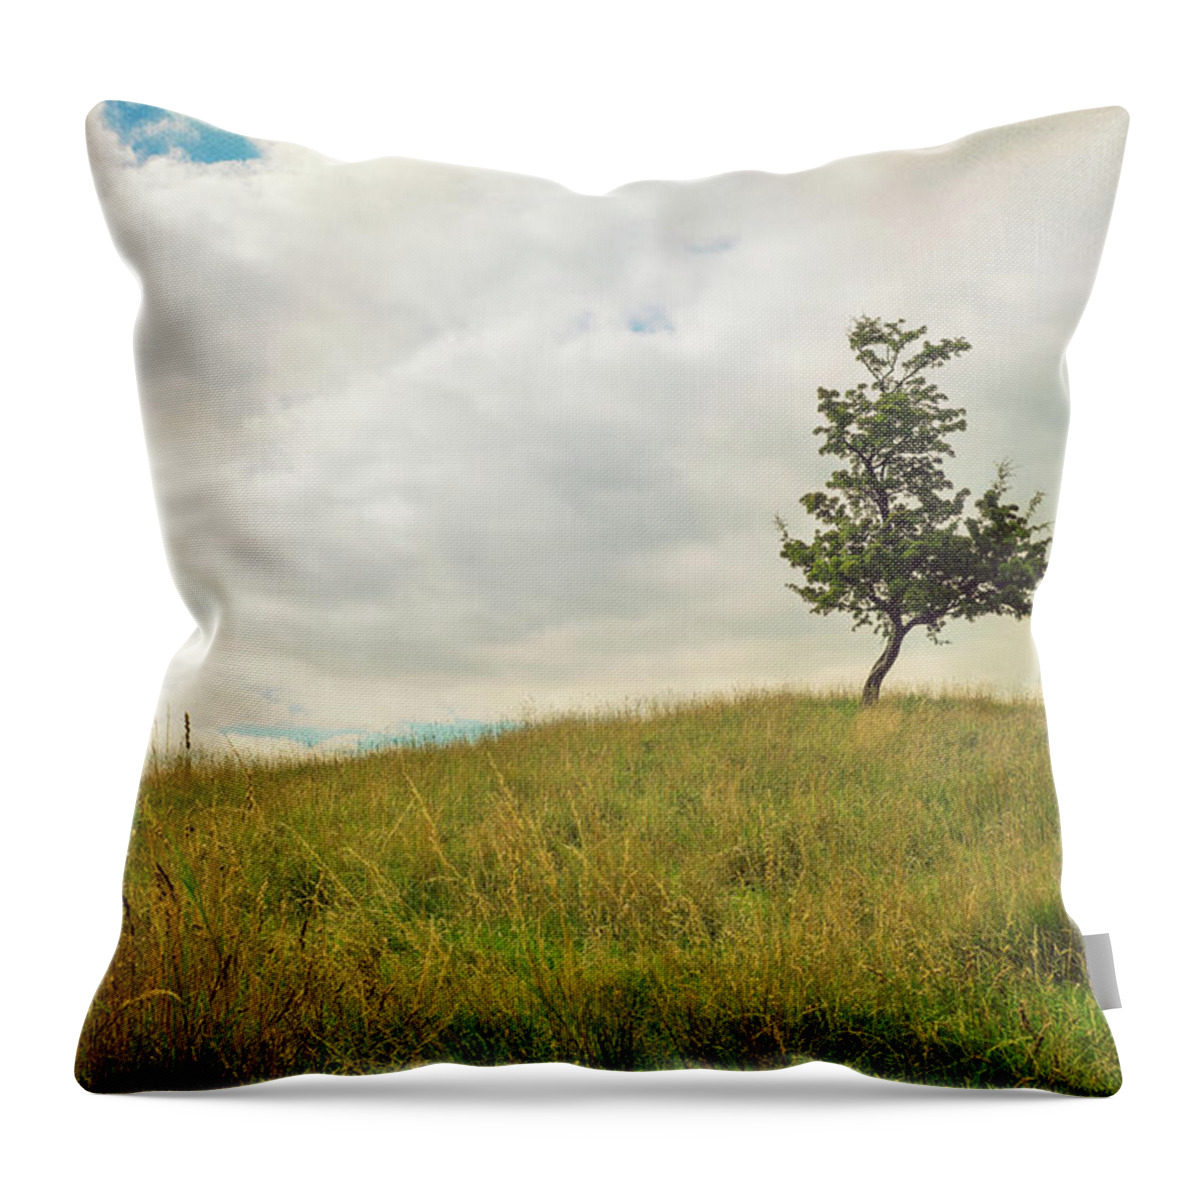 Dublin Throw Pillow featuring the photograph Hawthorn Tree On A Hill by Image By Catherine Macbride